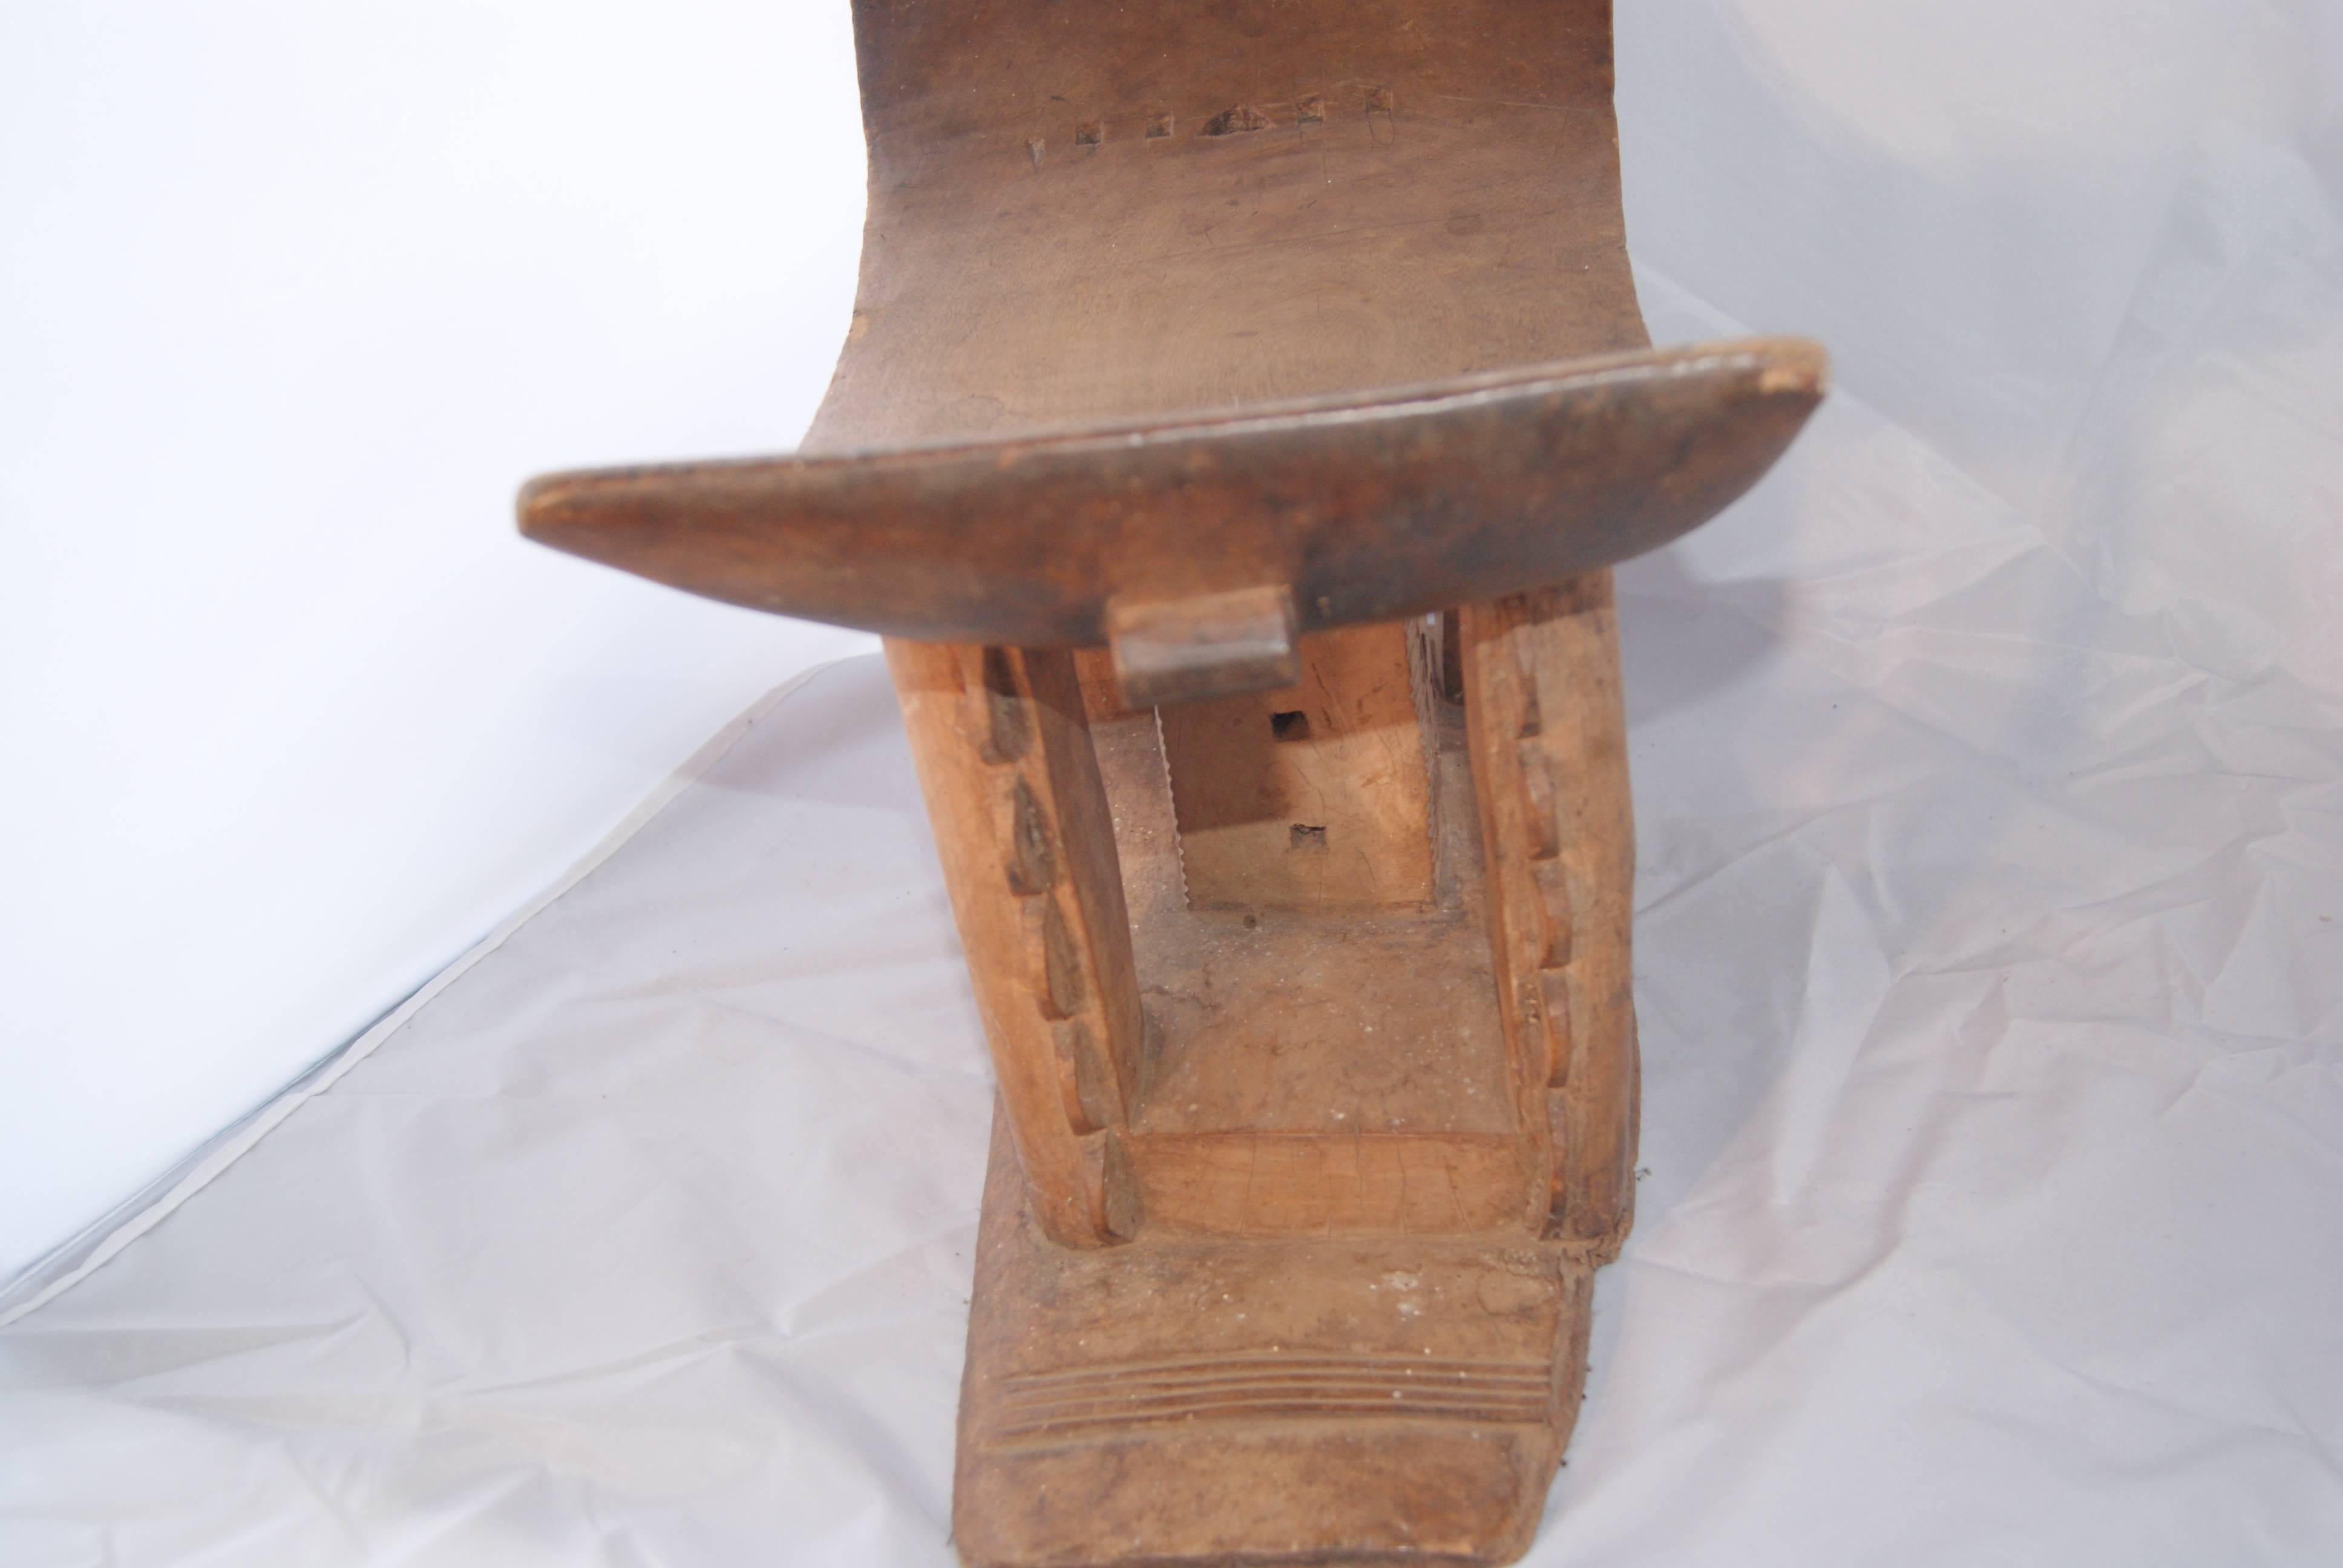 Stools indicate status, power, and the succession of chiefs and kings.  The Asante (or Ashanti) stool is carved from a single block of wood and has a crescent-shaped seat, flat base and an intricate support structure, which is typical.  Asante